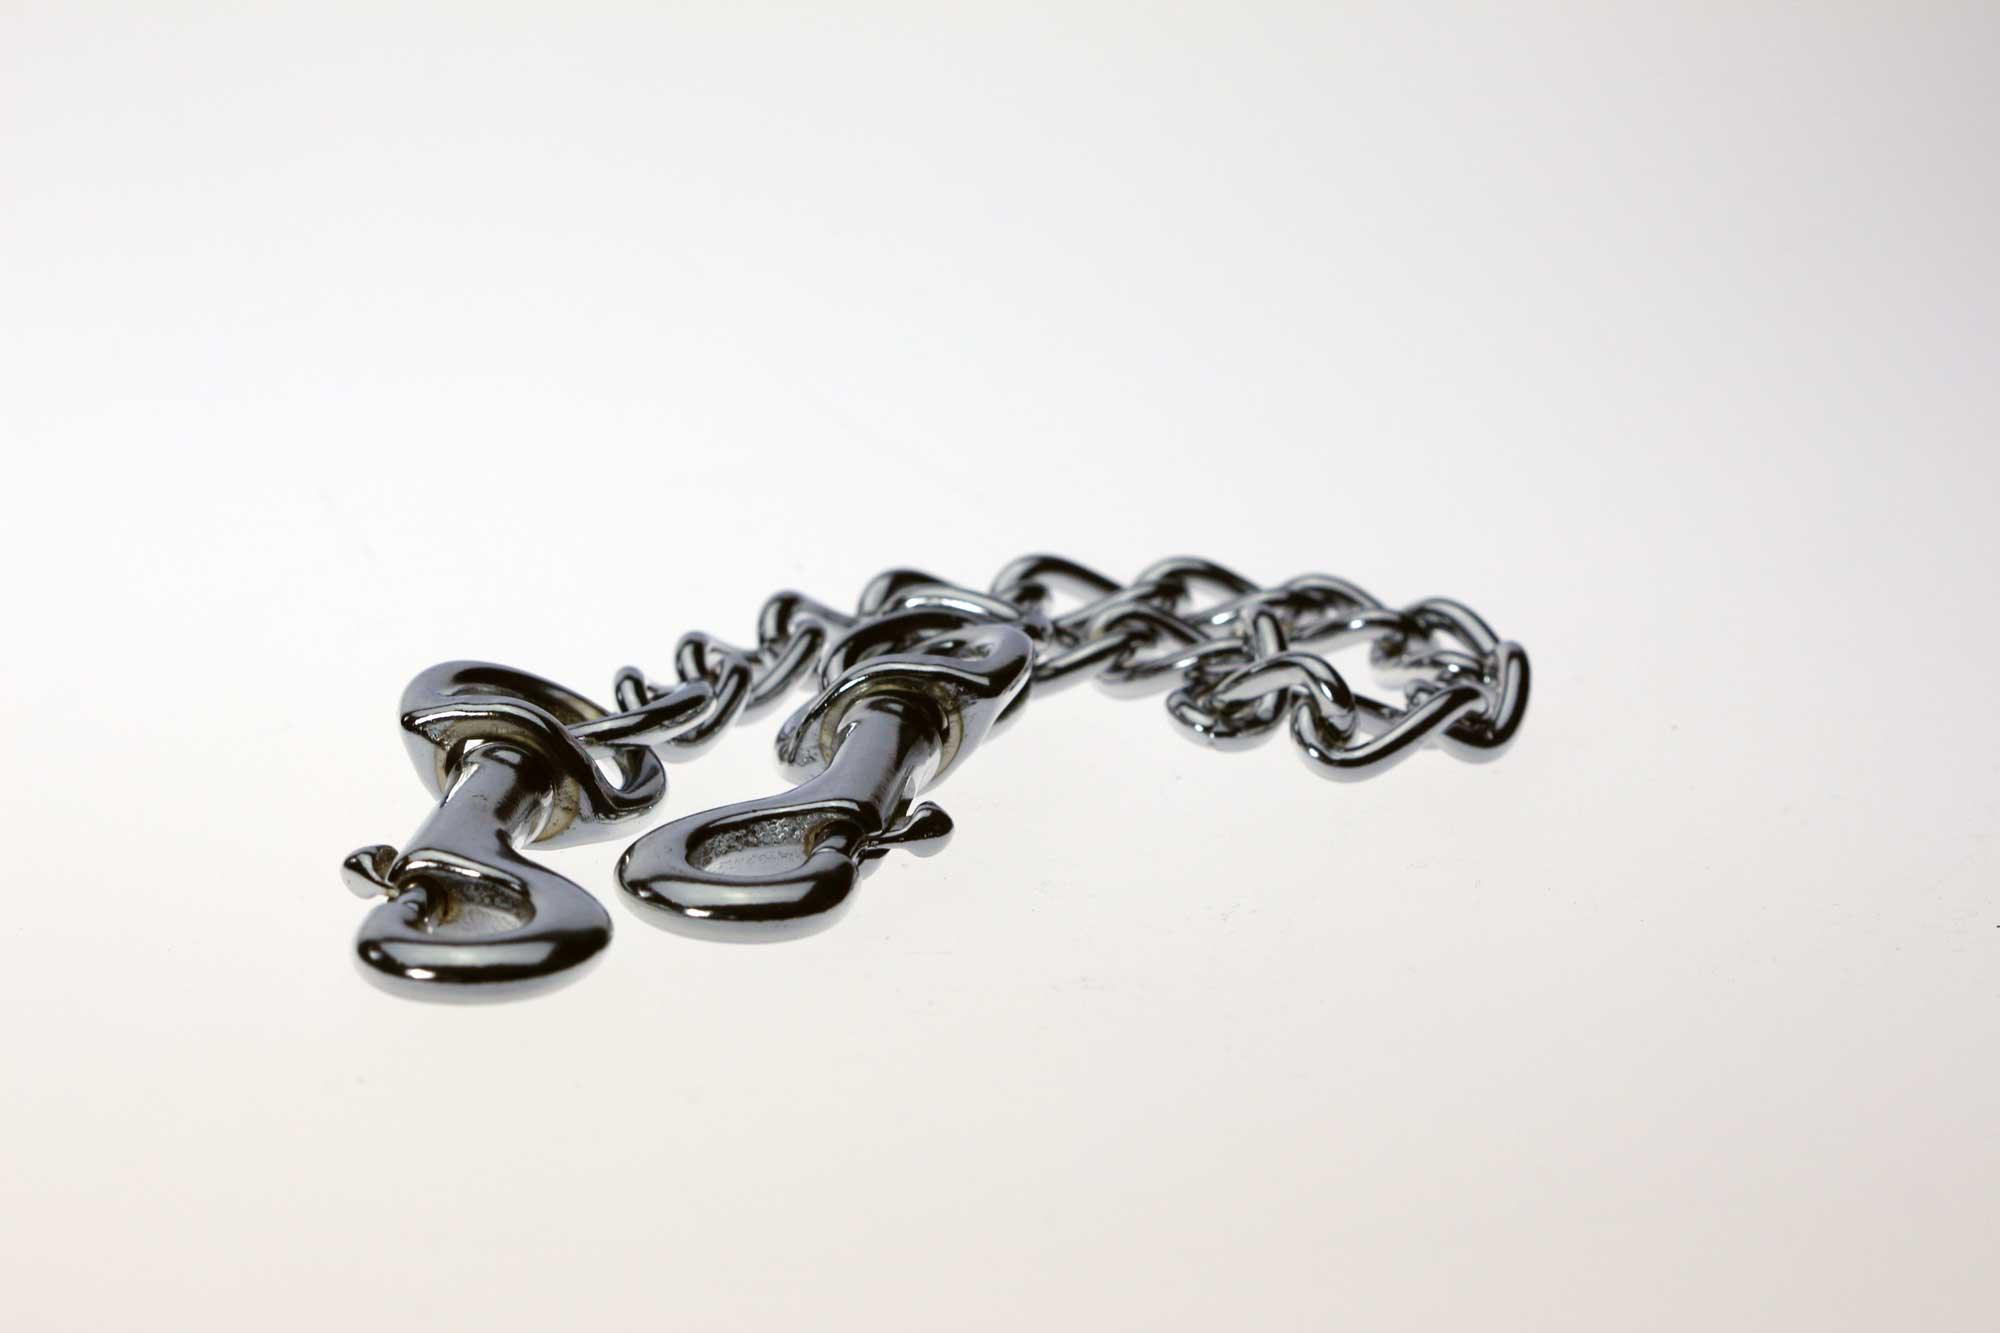 Dog Ute Chain with Clips